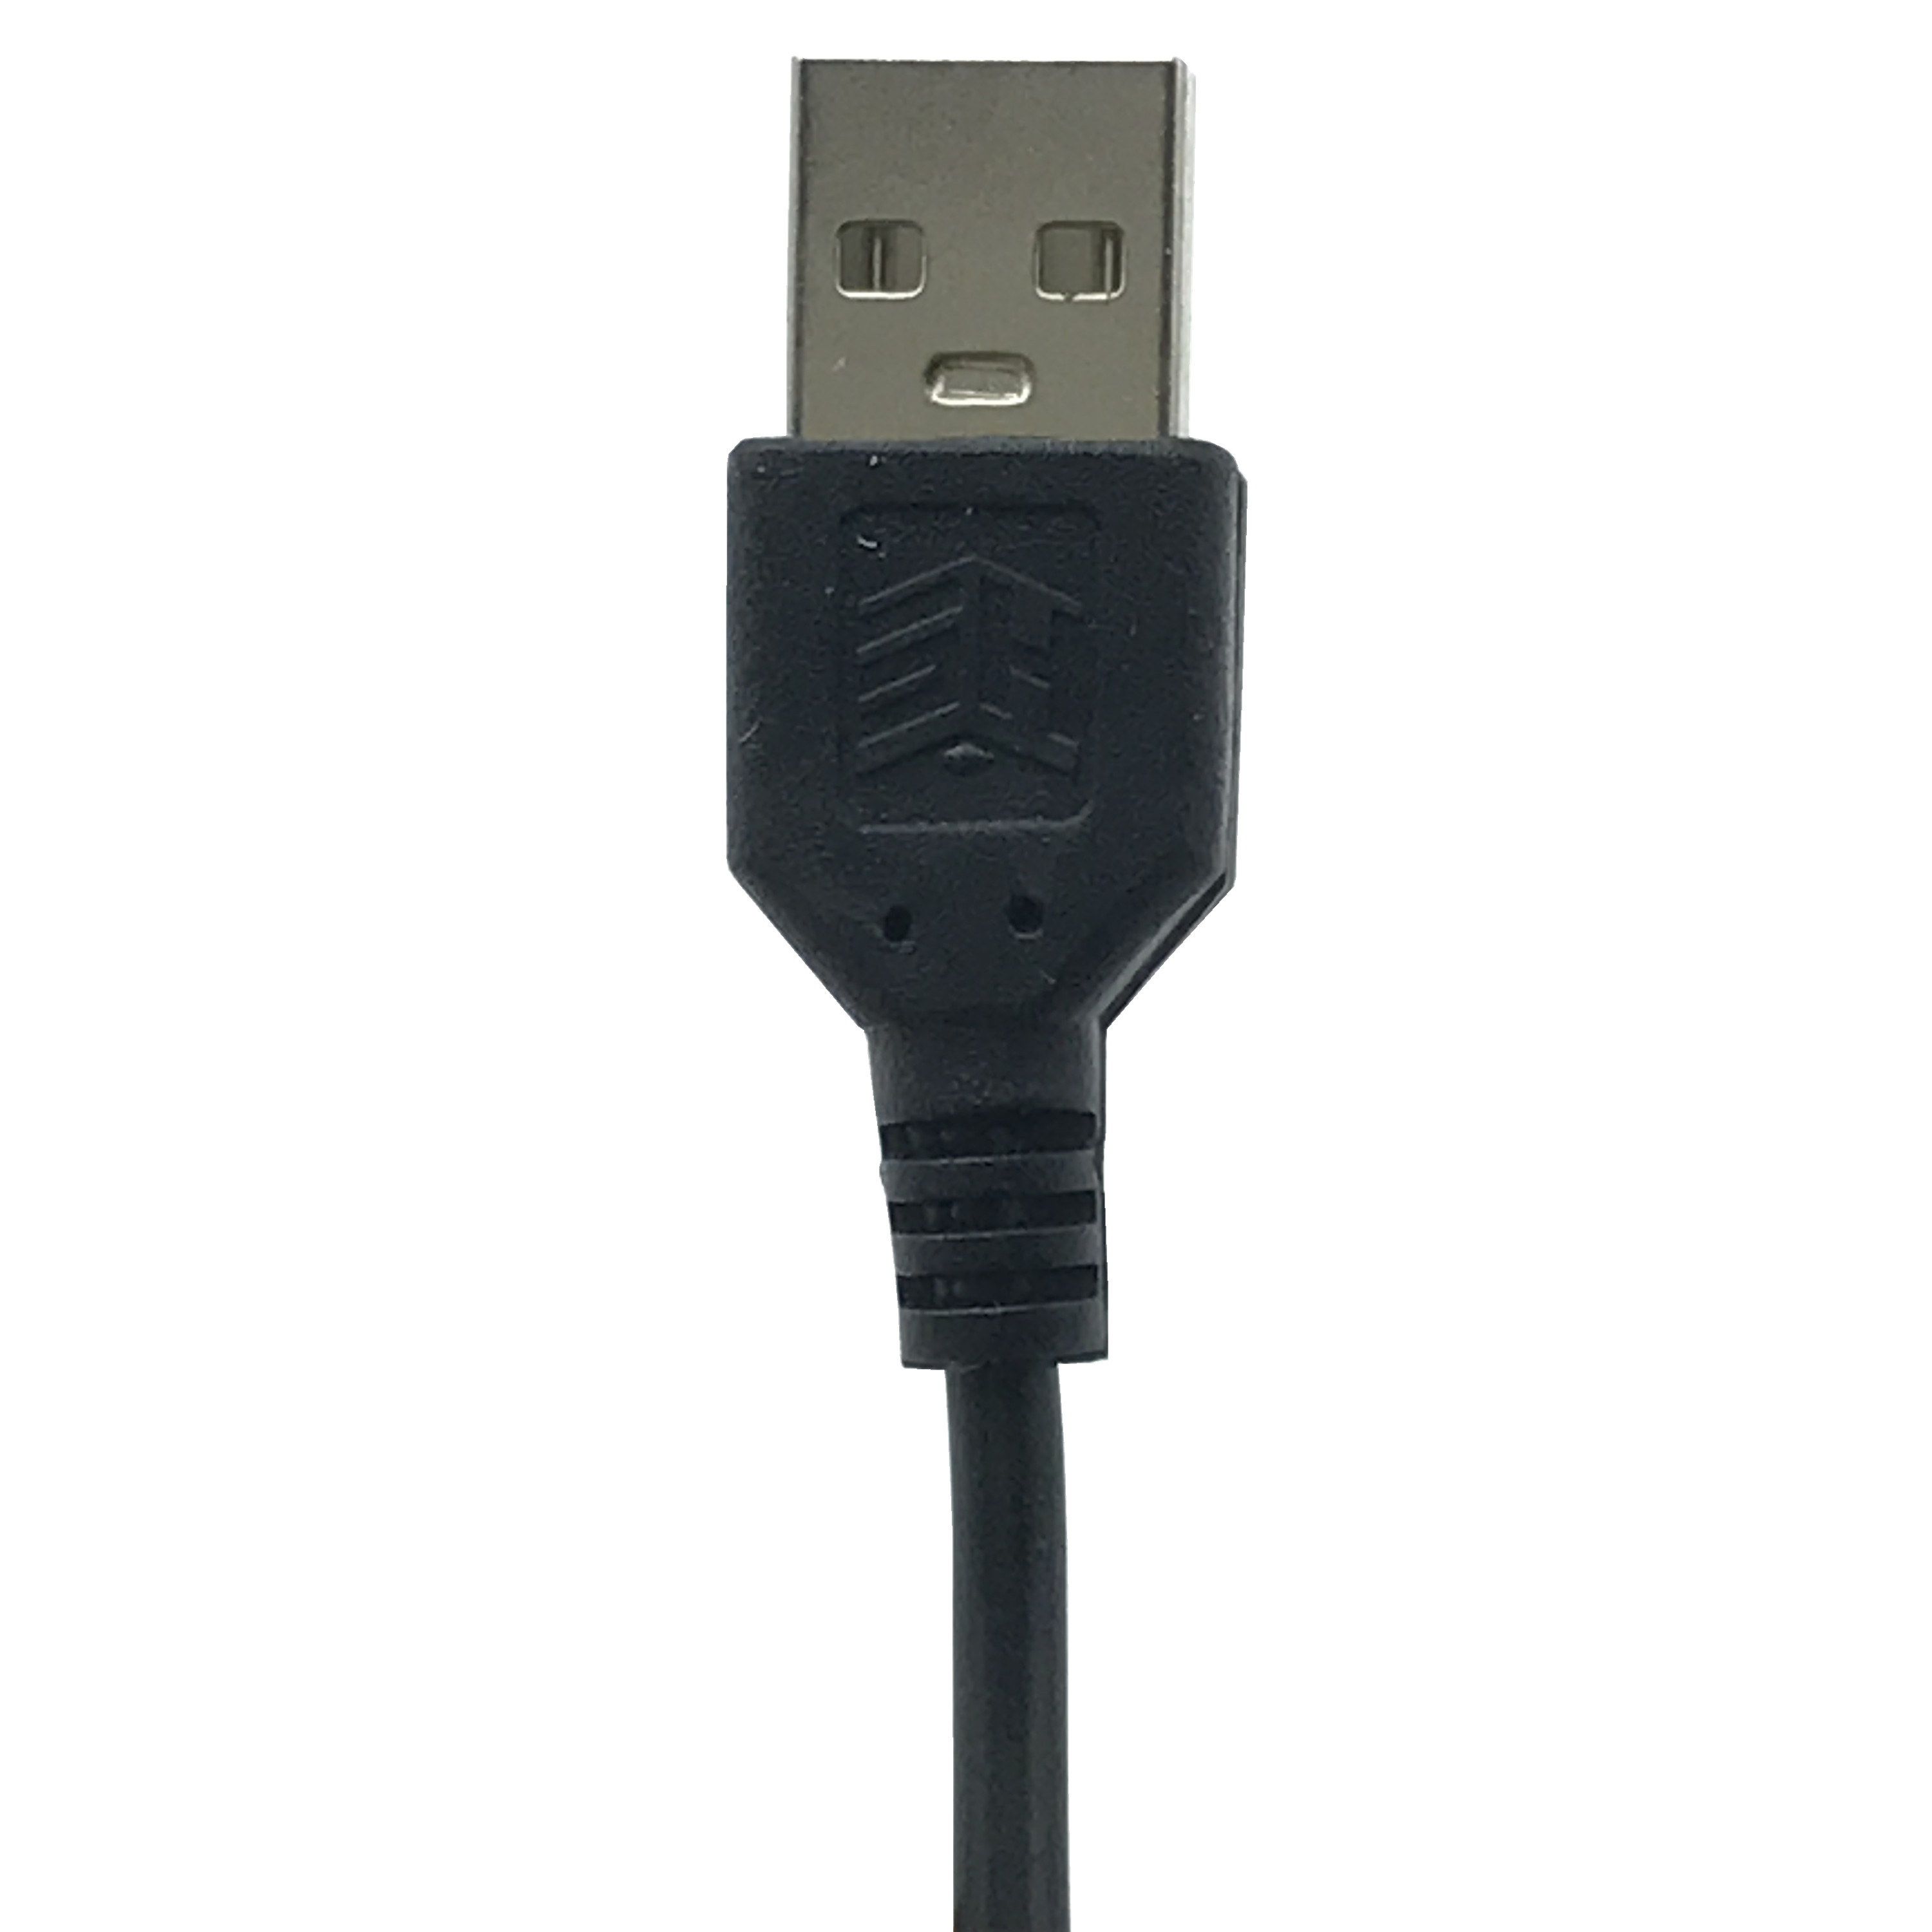 USB 5V Charger power Cable to DC 5.5 mm plug jack USB Power Cable Right 90 degree For MP3/MP4 Player 1.5m